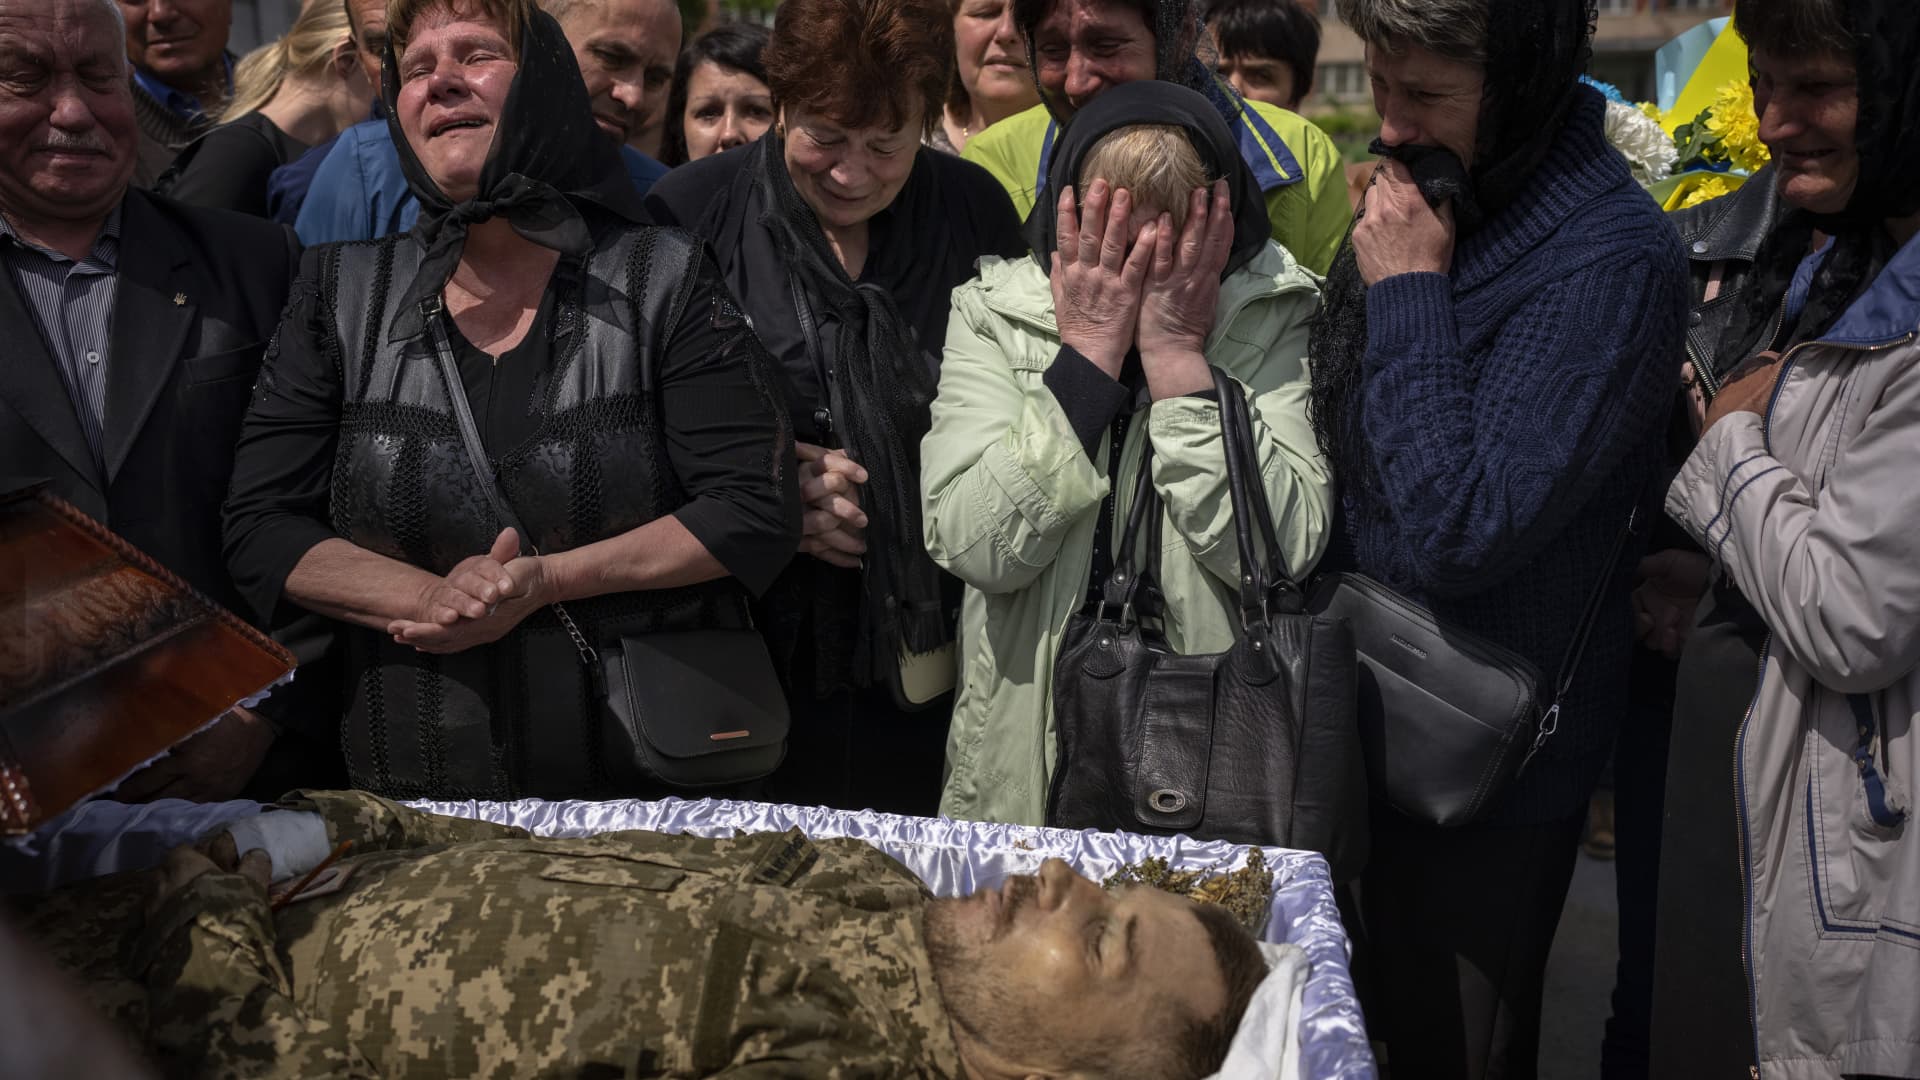 Relatives react next to the body of Pankratov Oleksandr, 49, a Ukrainian military servicemen who was killed in Donetsk province, during his funeral in Lviv, Ukraine, Saturday, May 14, 2022.